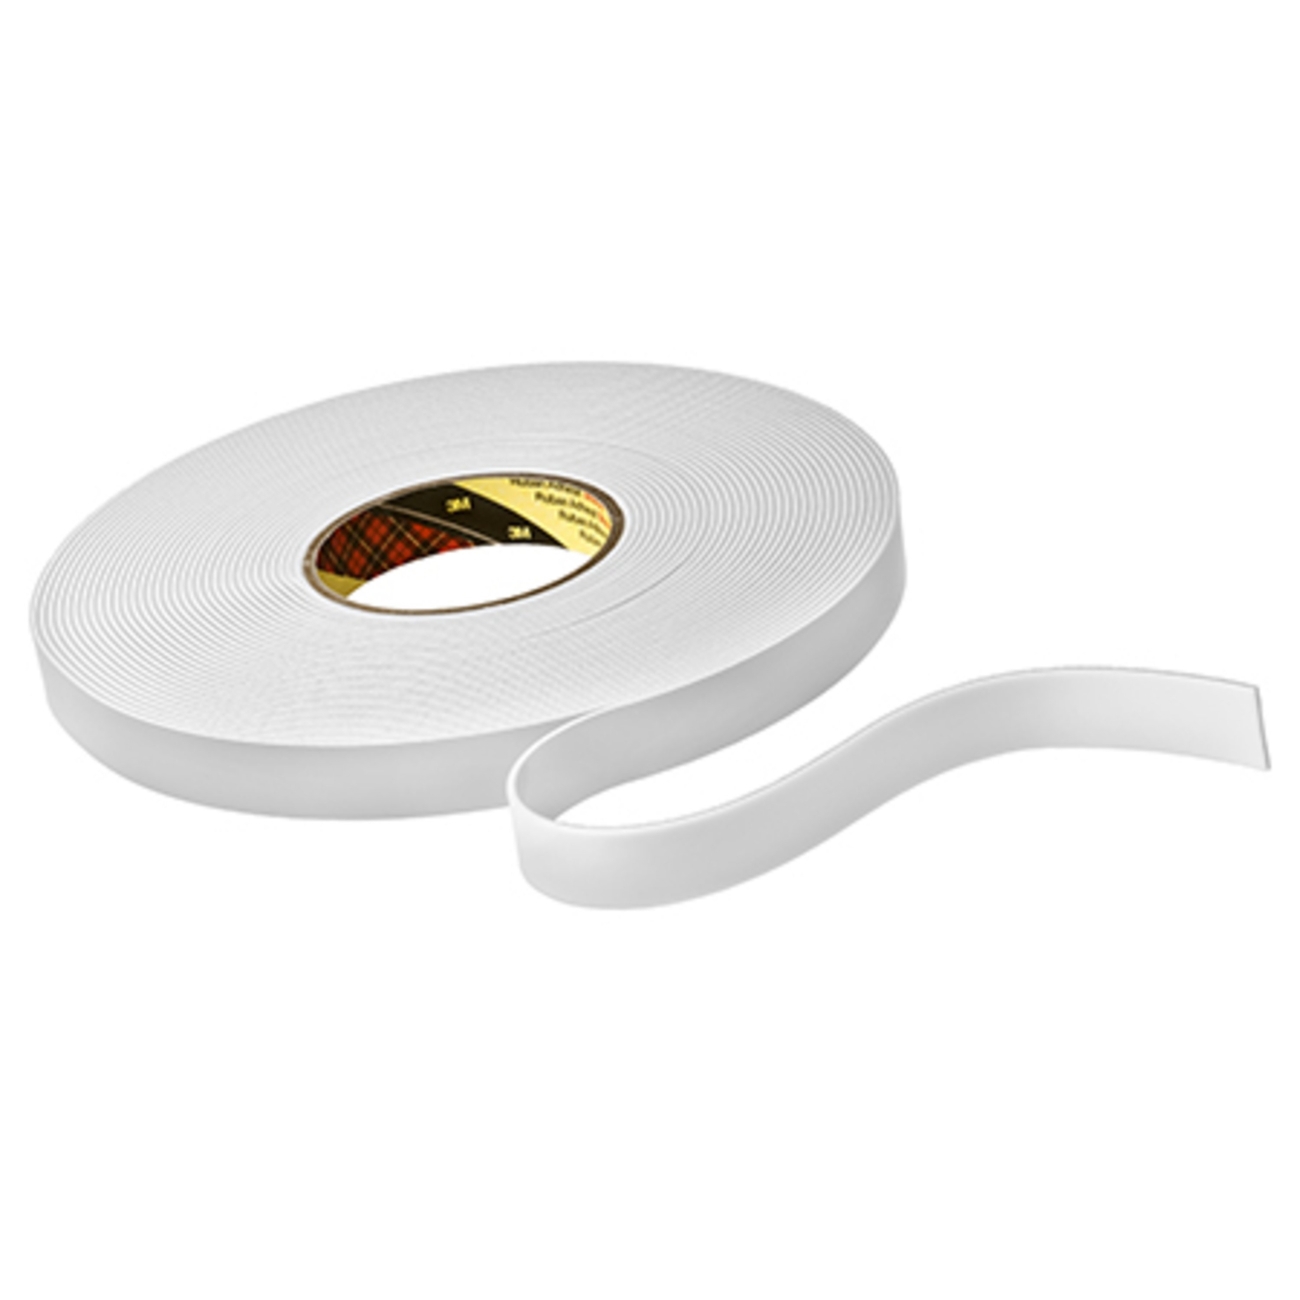 3M Double-sided PE foam tape with acrylic adhesive 9515W, white, 25 mm x 33 m, 1.5 mm